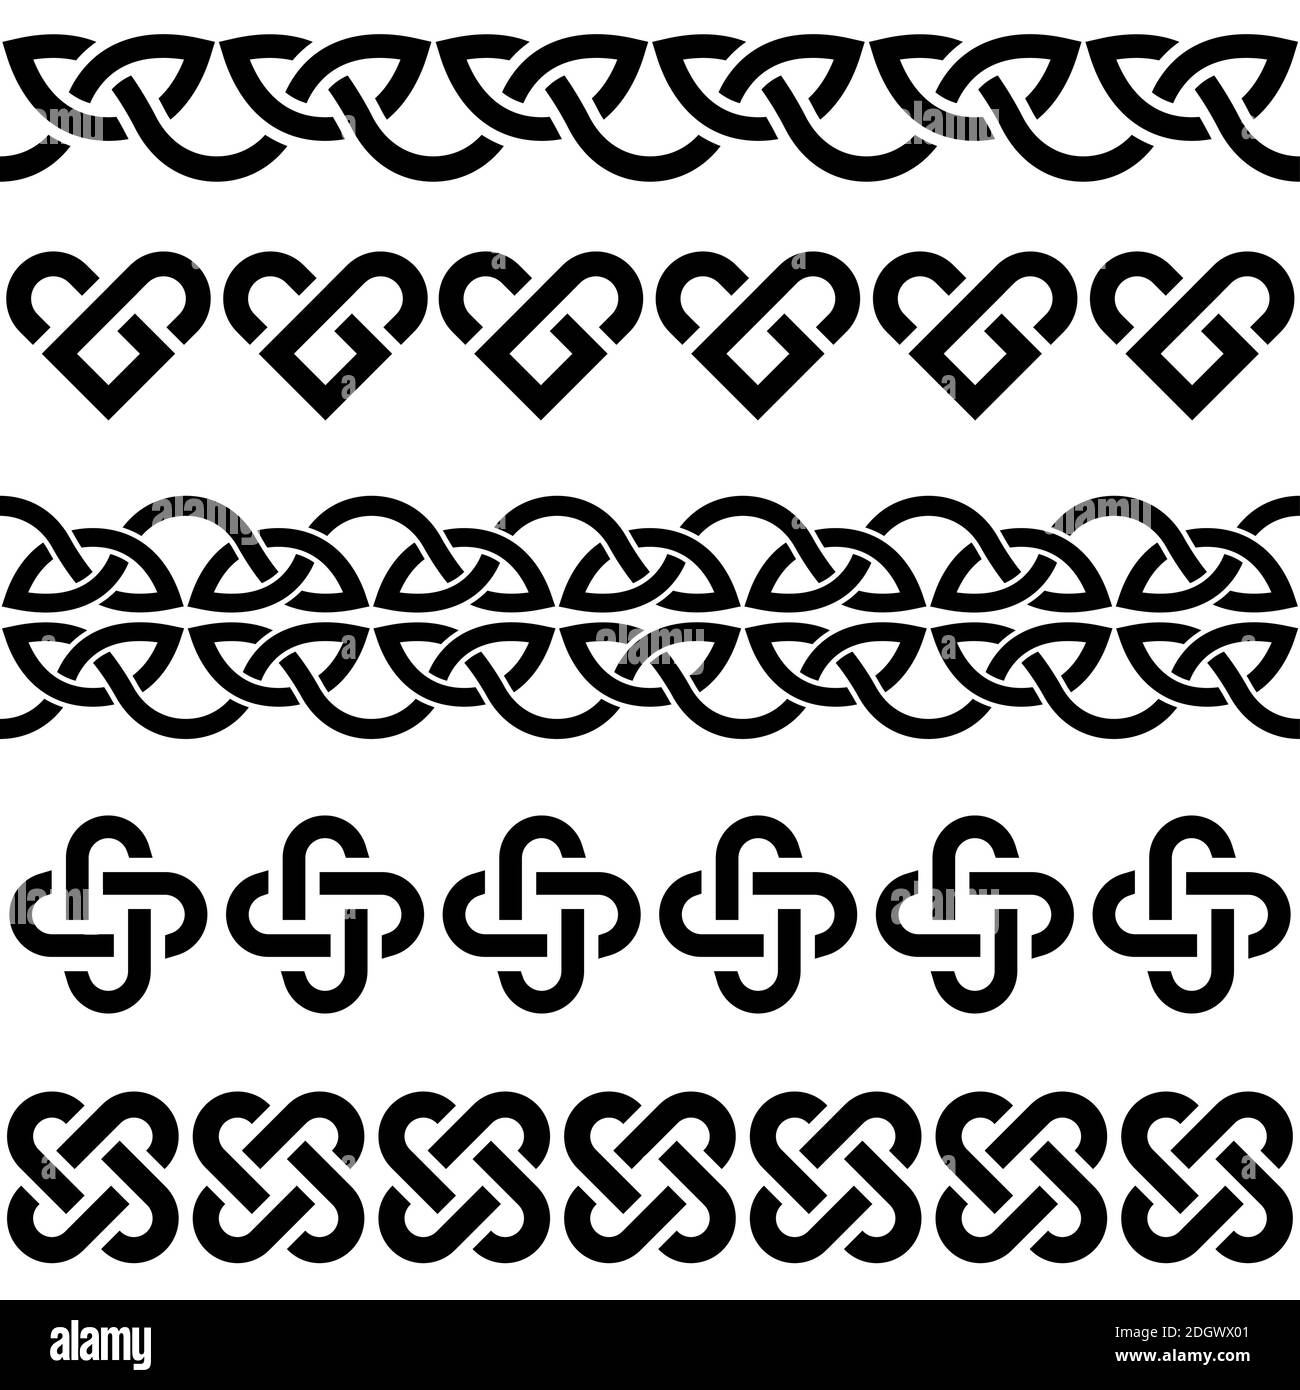 https://c8.alamy.com/comp/2DGWX01/irish-celtic-vector-knots-and-braids-seamless-patterns-collection-border-and-frame-design-perfect-for-greeting-cards-st-patricks-day-celebration-2DGWX01.jpg